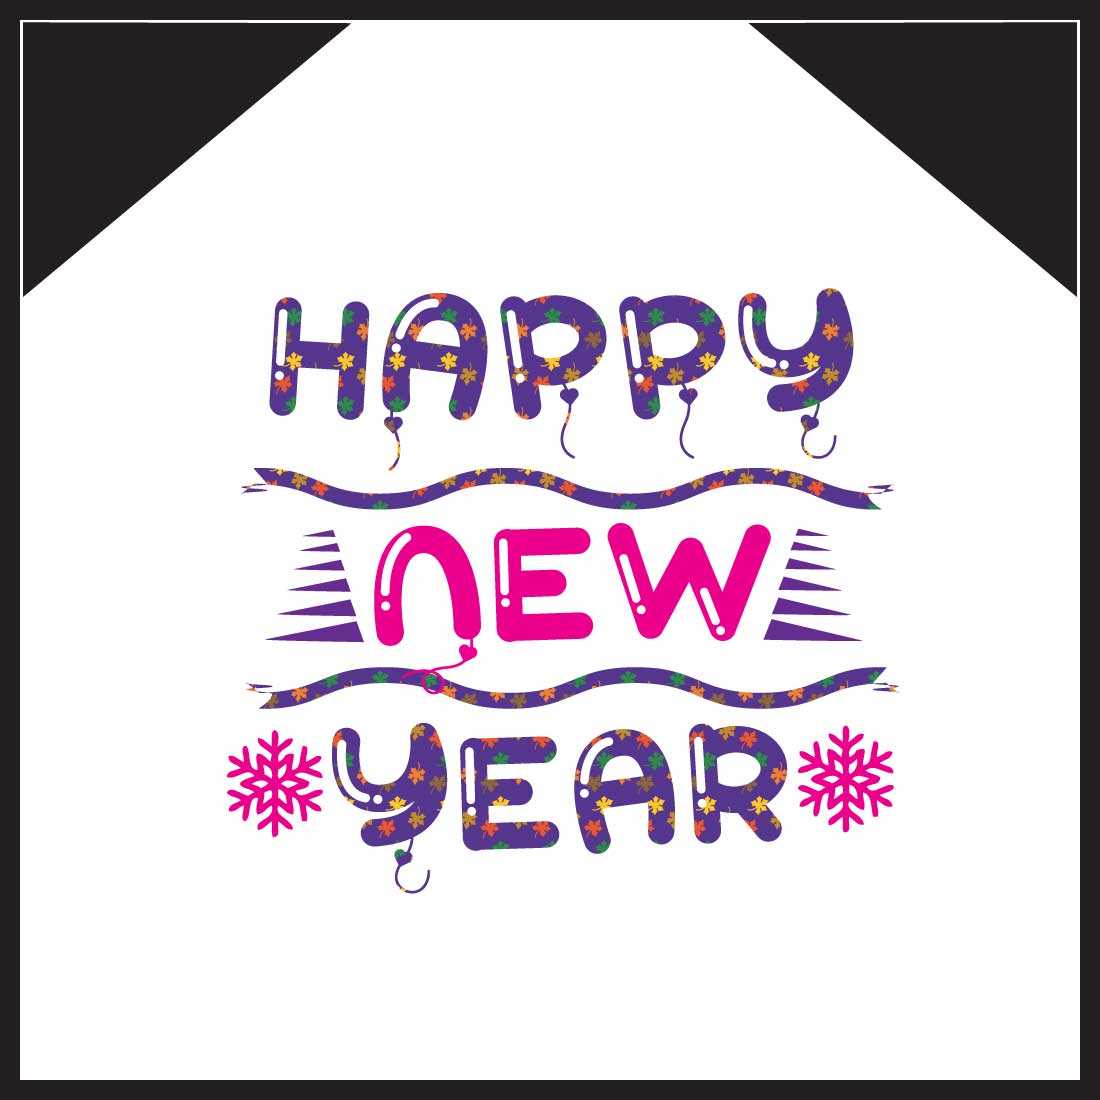 Be happy in New year with this colorful logo.